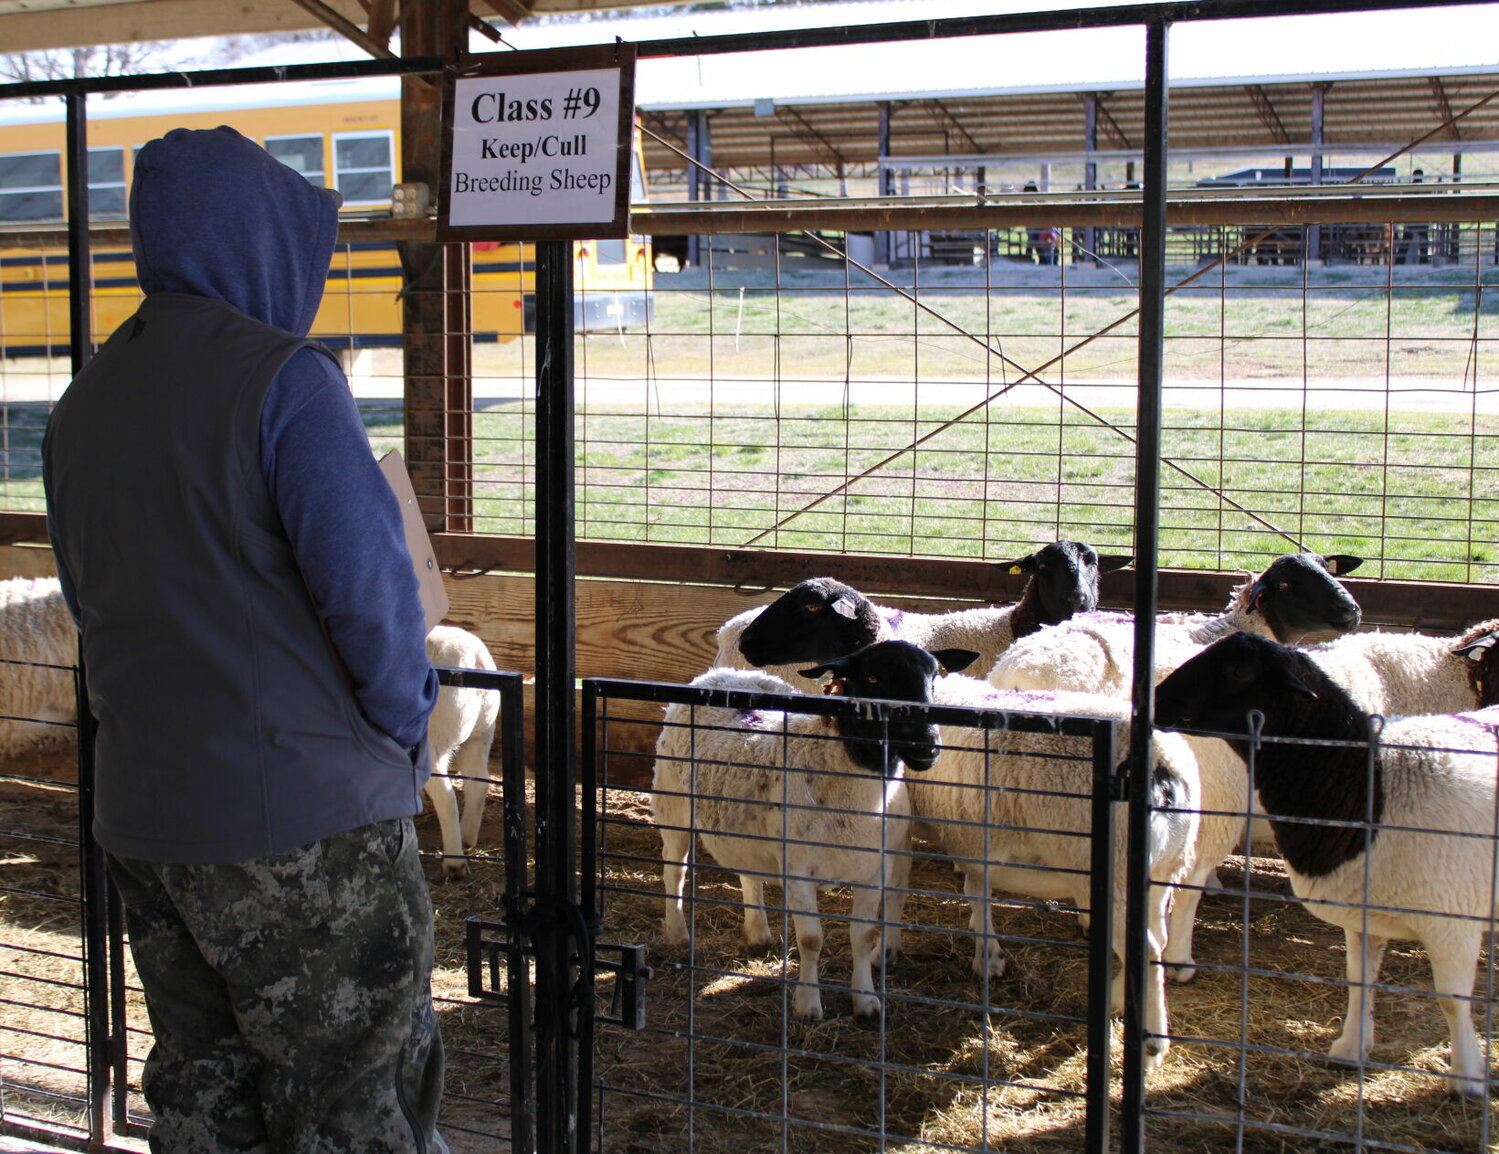 Students were taken to the Webster County Fairgrounds to judge livestock like the one pictured.


Mail Photos by John "J.T." Jones